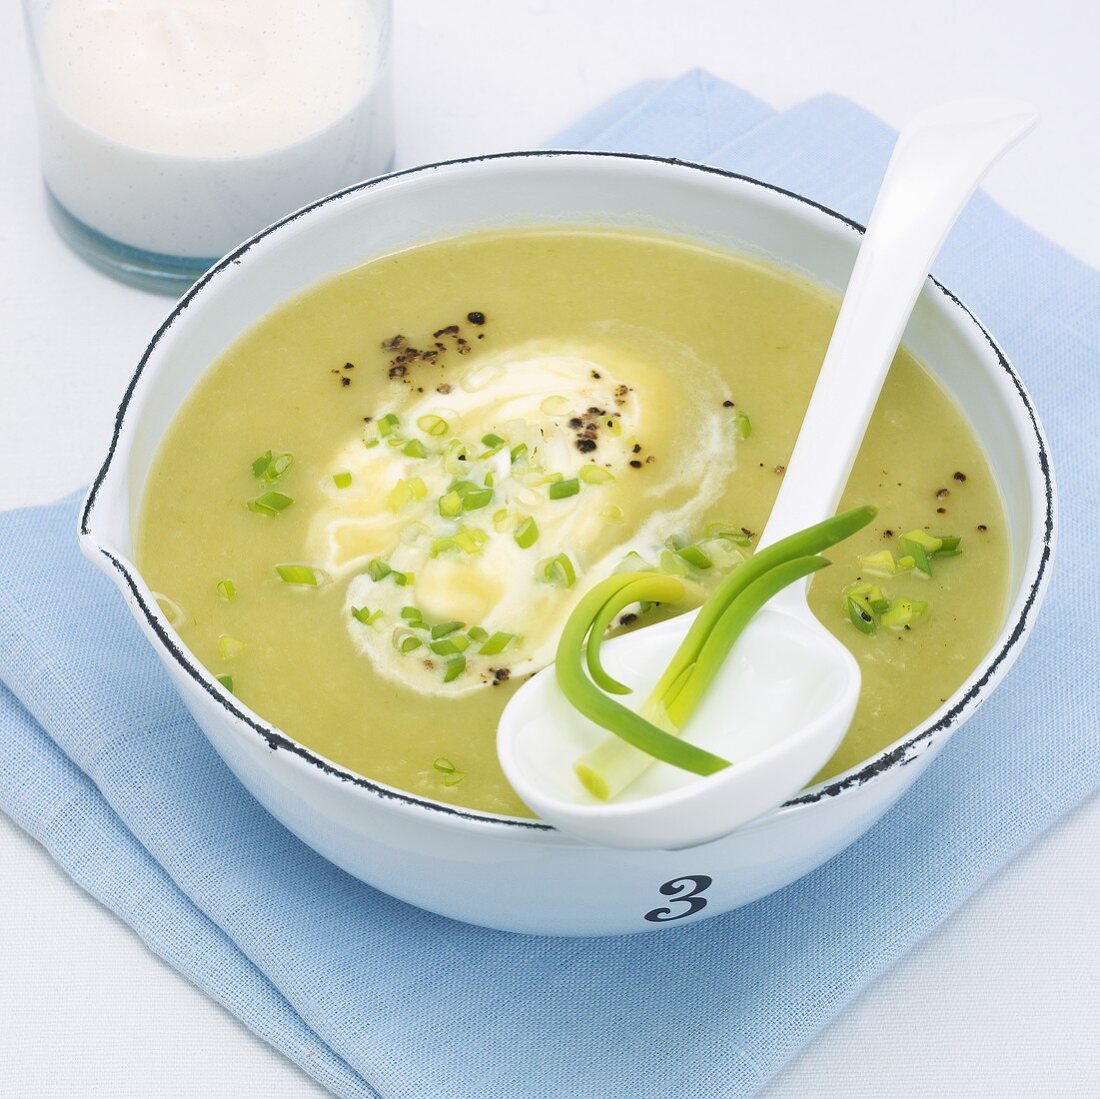 Potato and leek soup (serve chilled or warm)